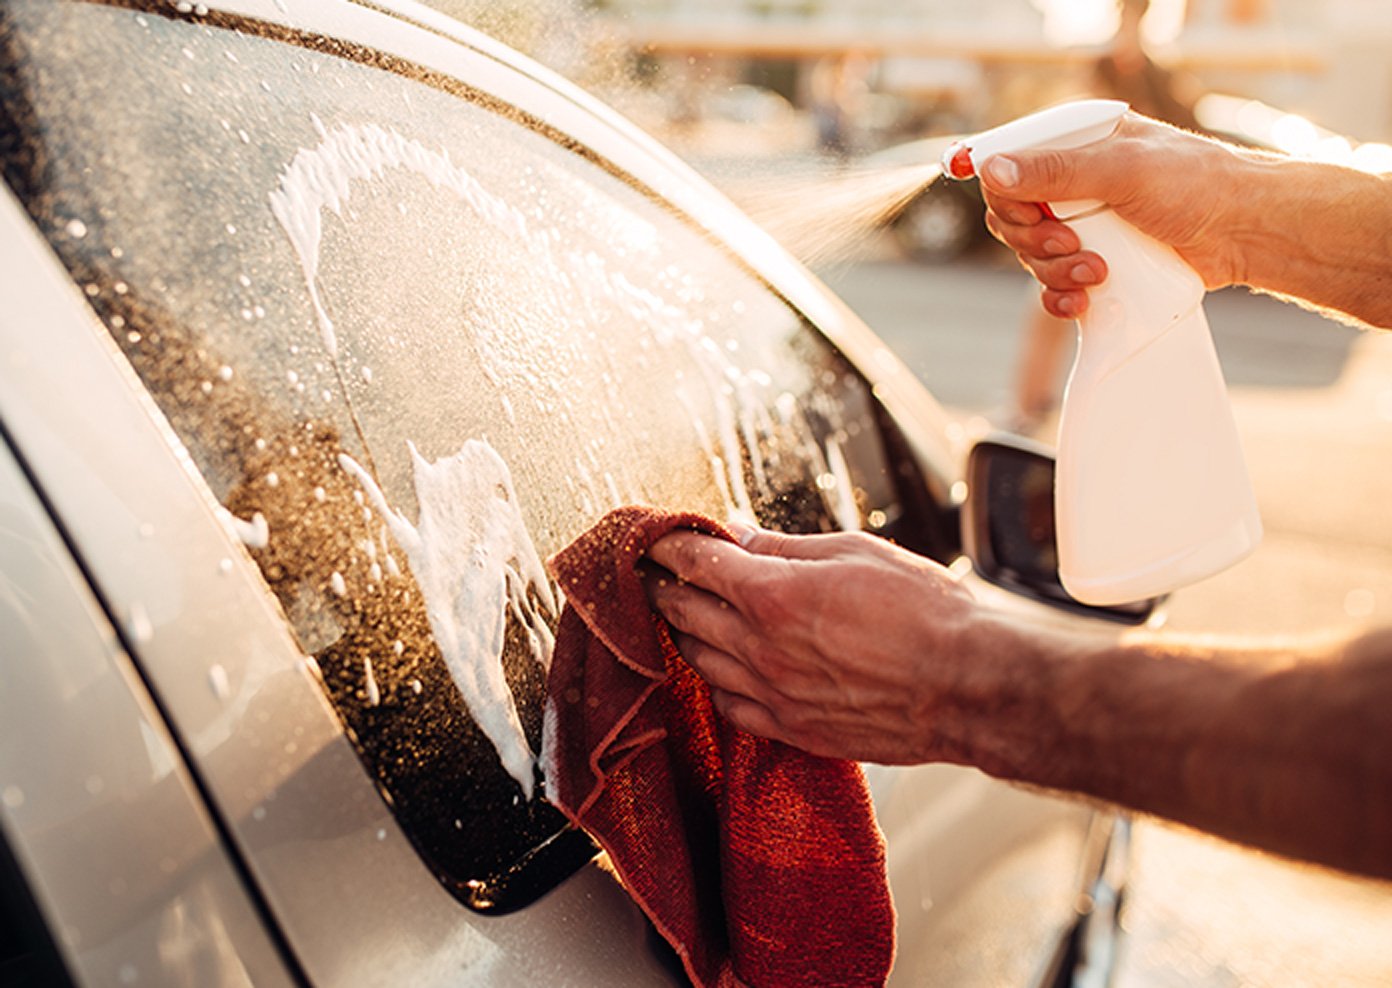 What is a Good Substitute for Car Wash Soap? – Shine Armor